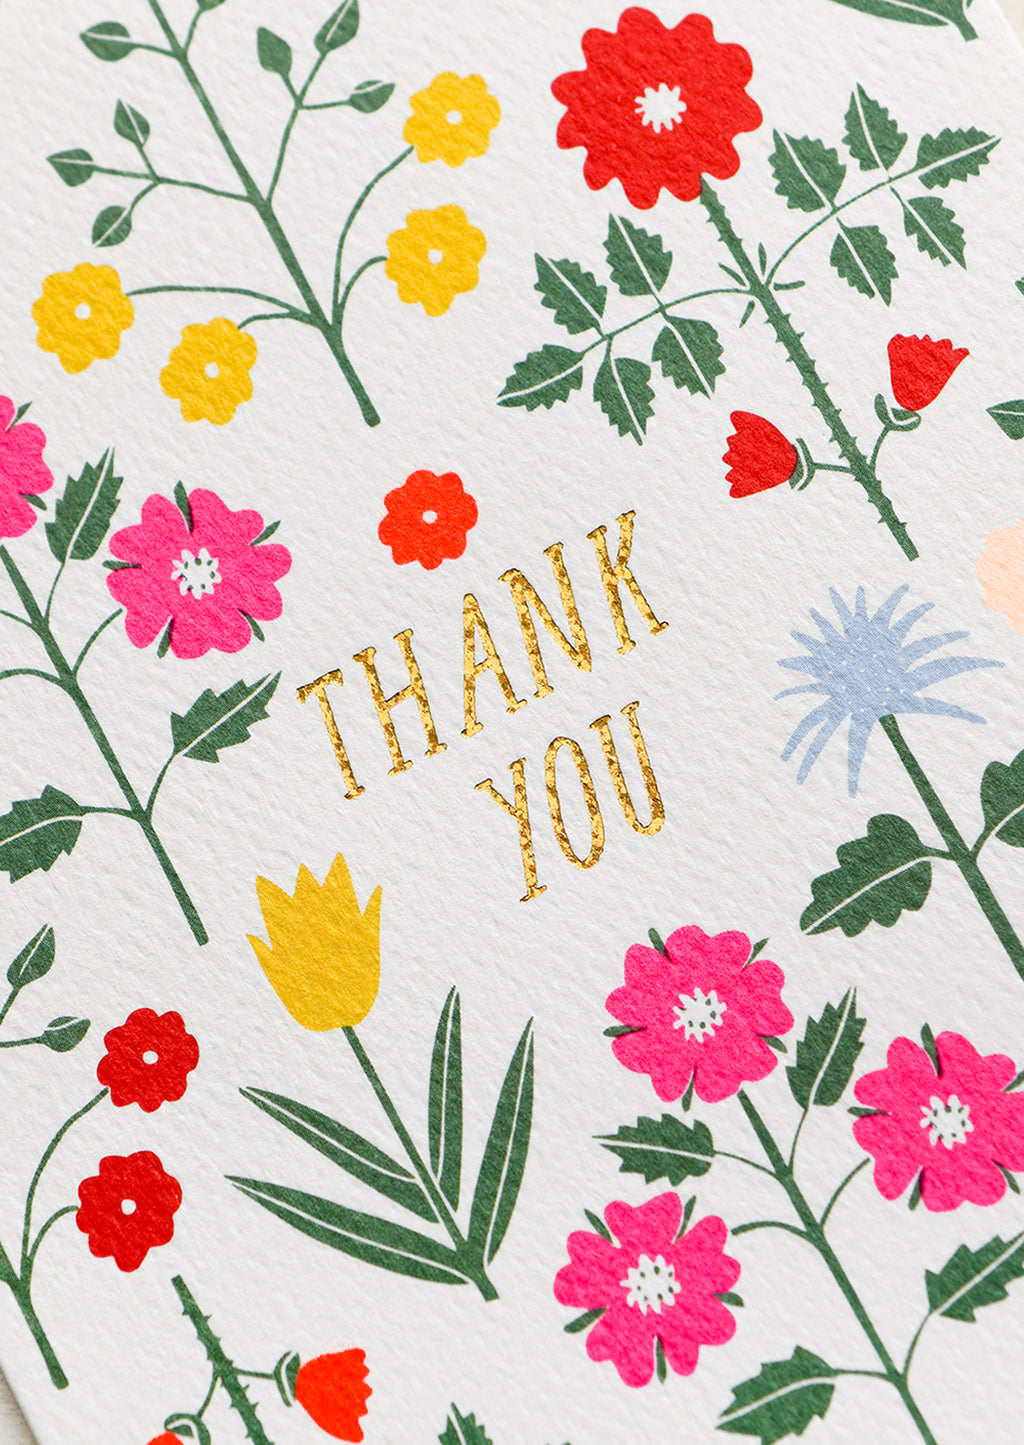 Single Card: A set of thank you cards with vibrant floral pattern and gold "Thank You" text at center.